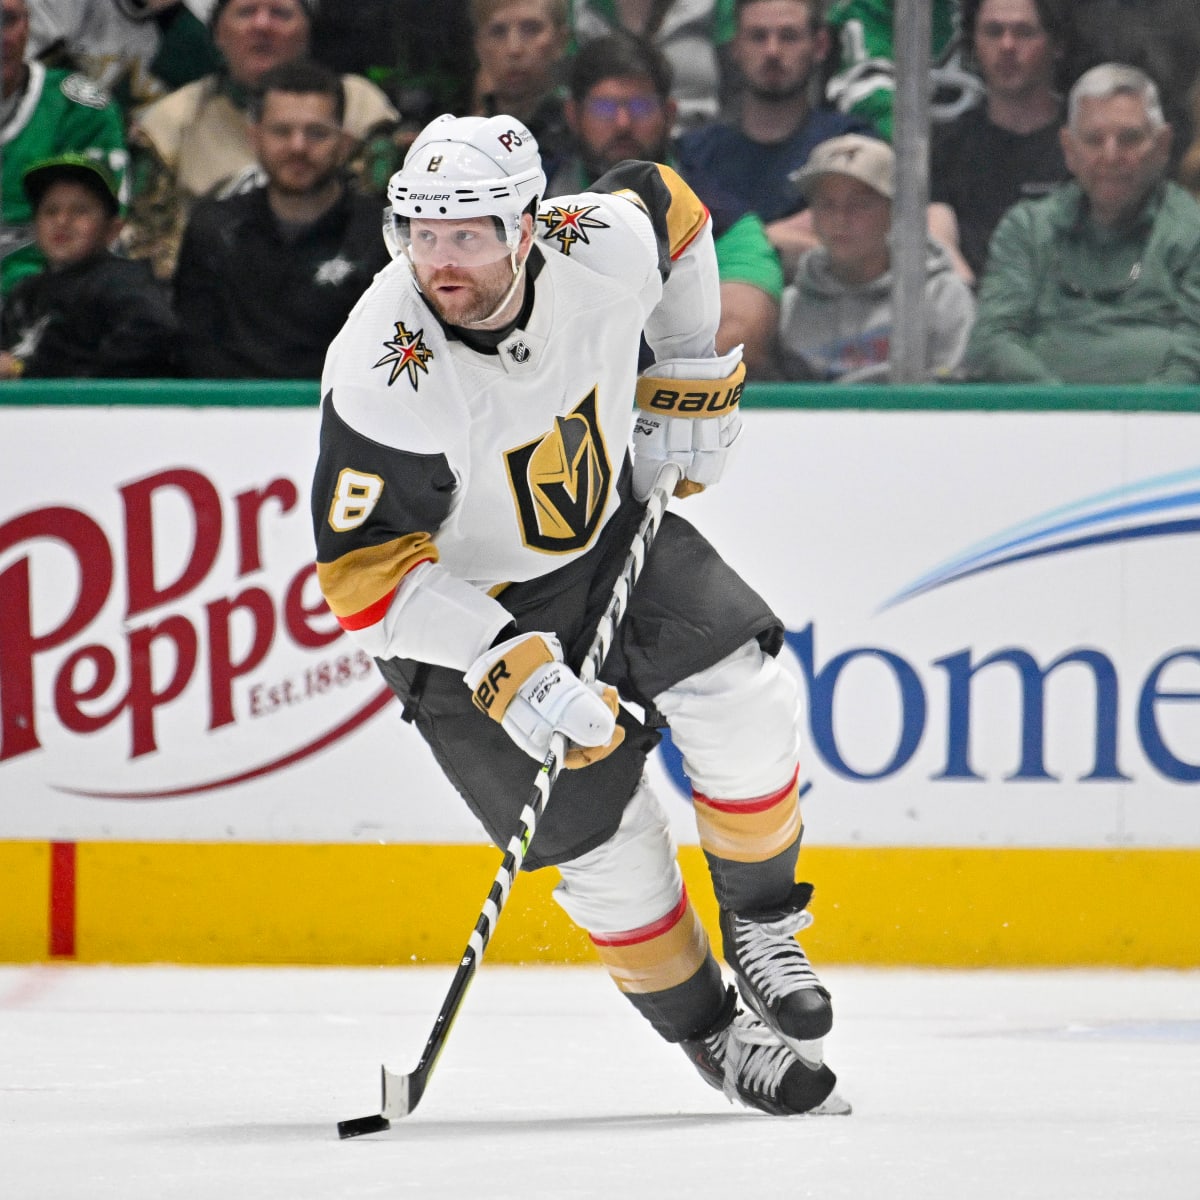 Should The Boston Bruins Look At Signing Phil Kessel?